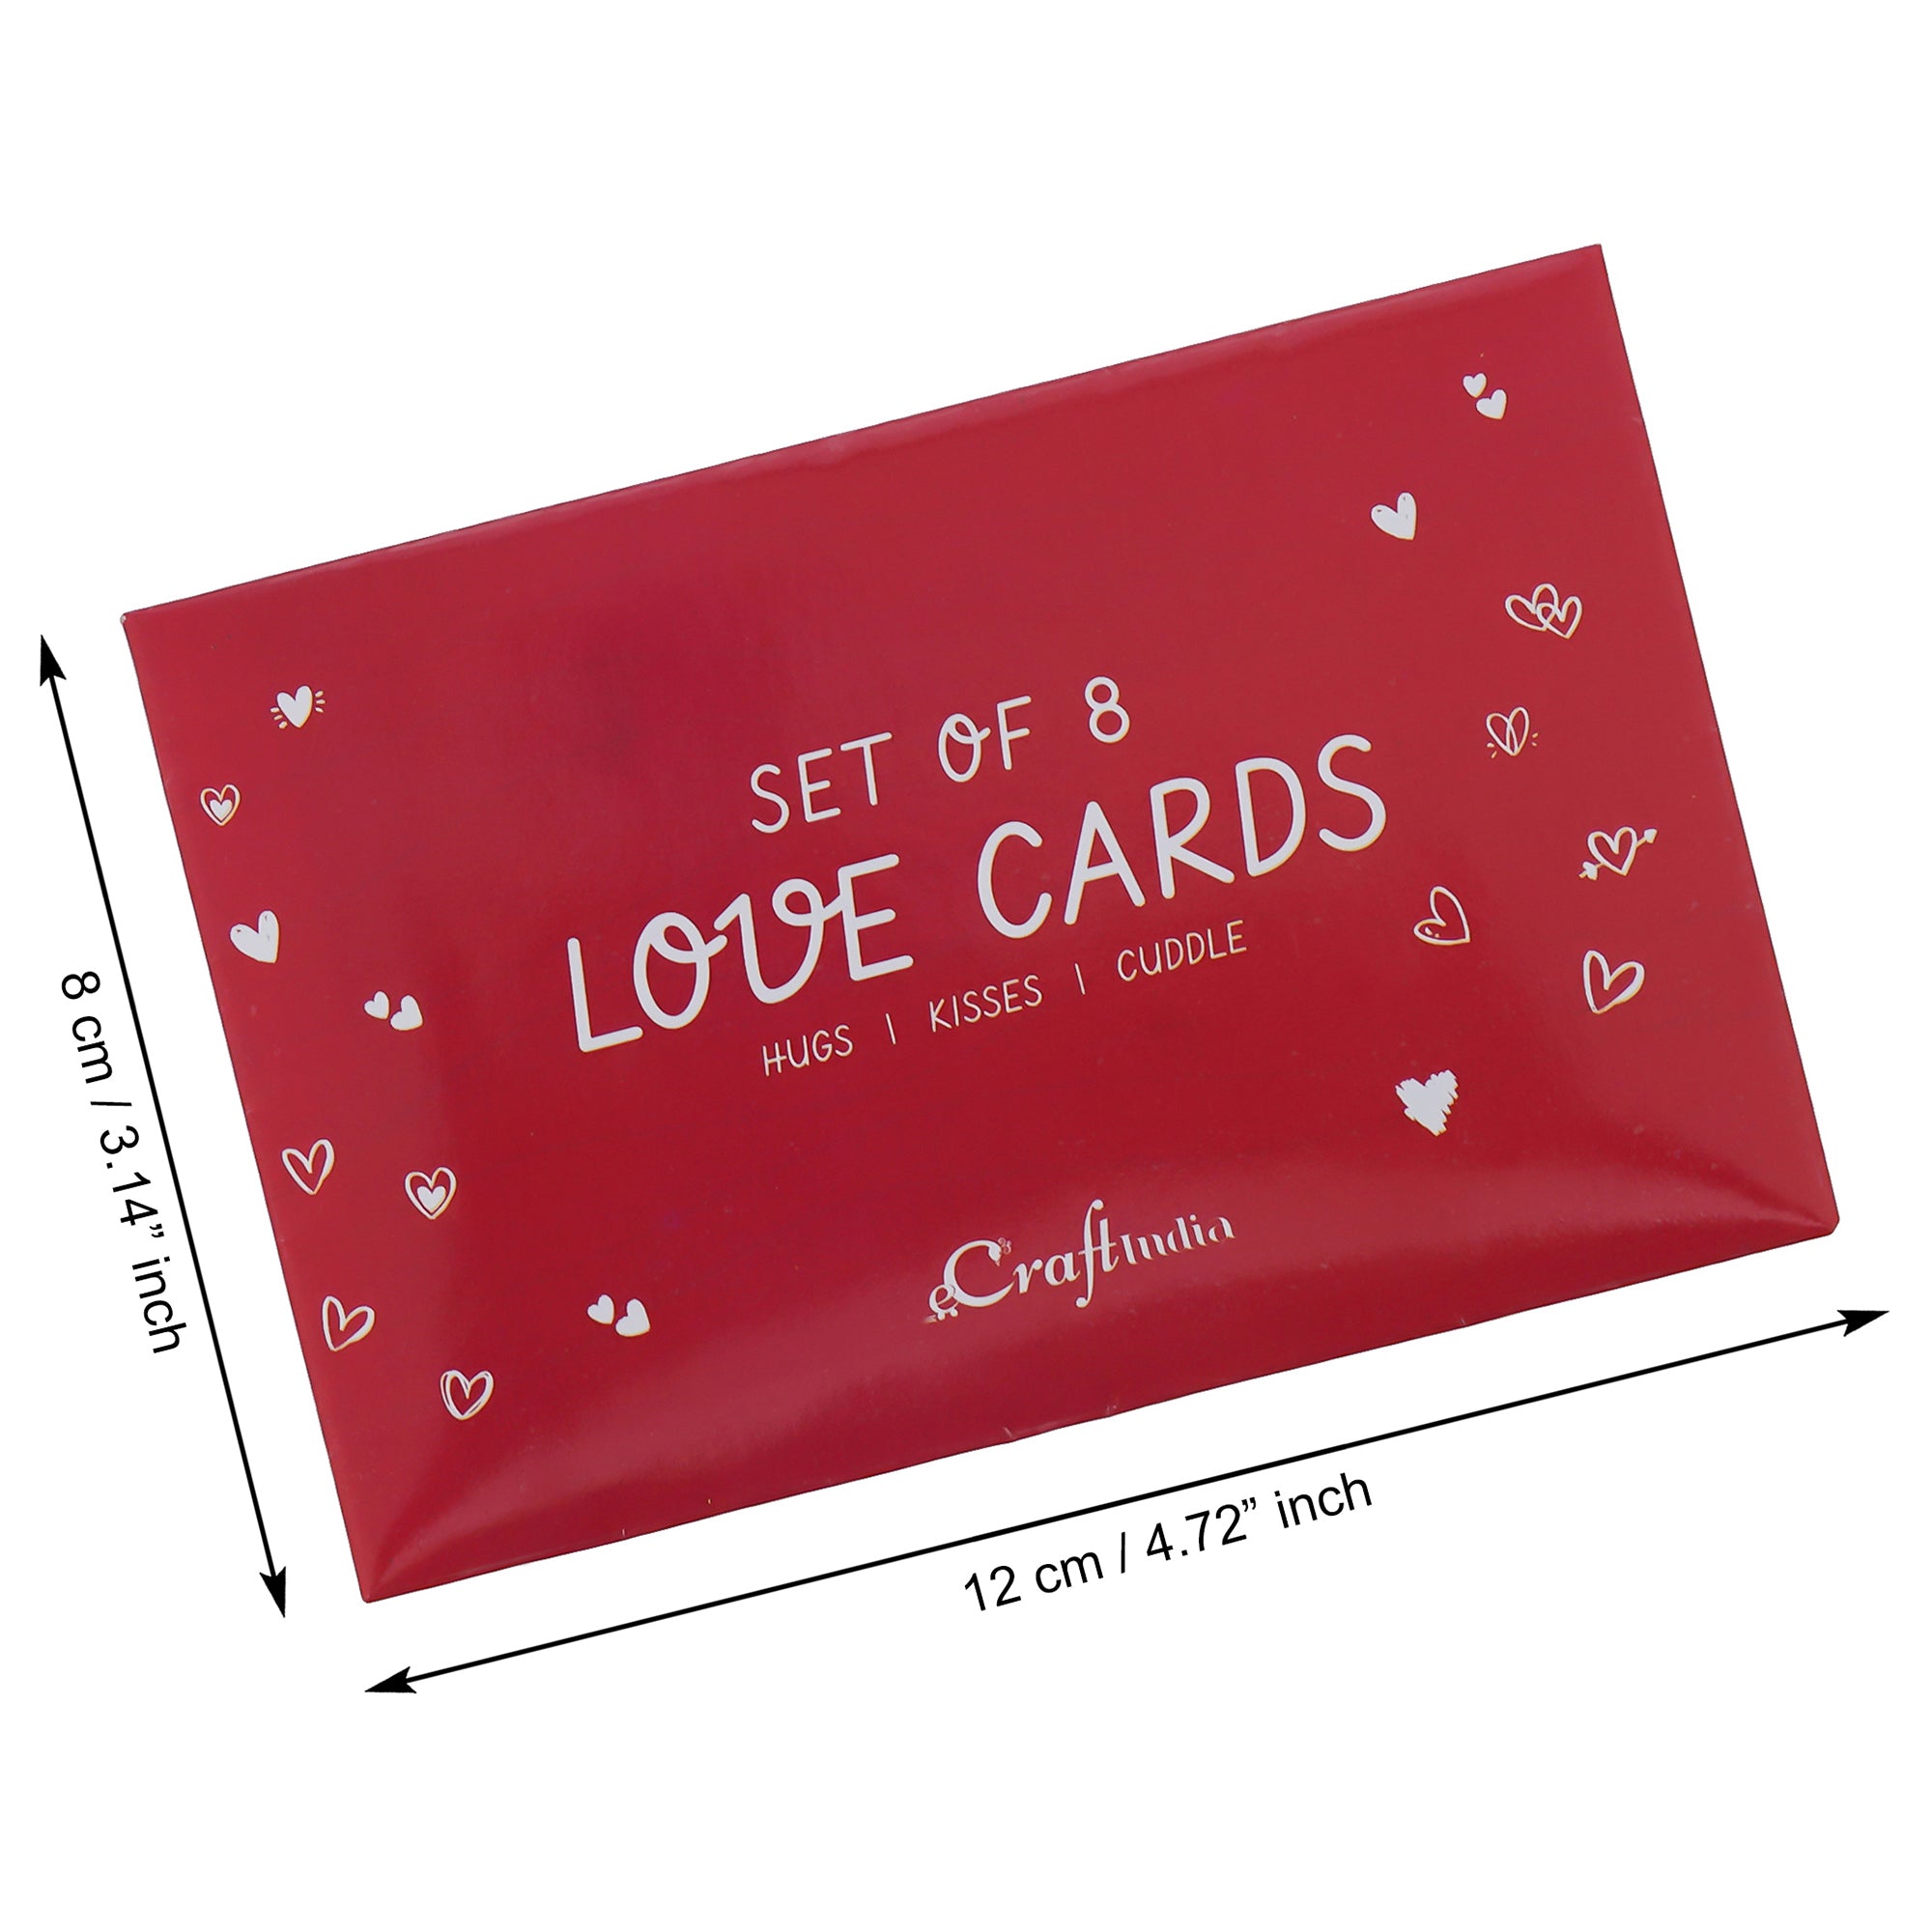 Valentine Combo of Pack of 8 Love Gift Cards, "20 Reasons Why I Need You" Printed on Little Hearts Wooden Gift Set, Red Roses Bouquet and White, Red Teddy Bear Valentine's Rectangle Shaped Gift Box 2